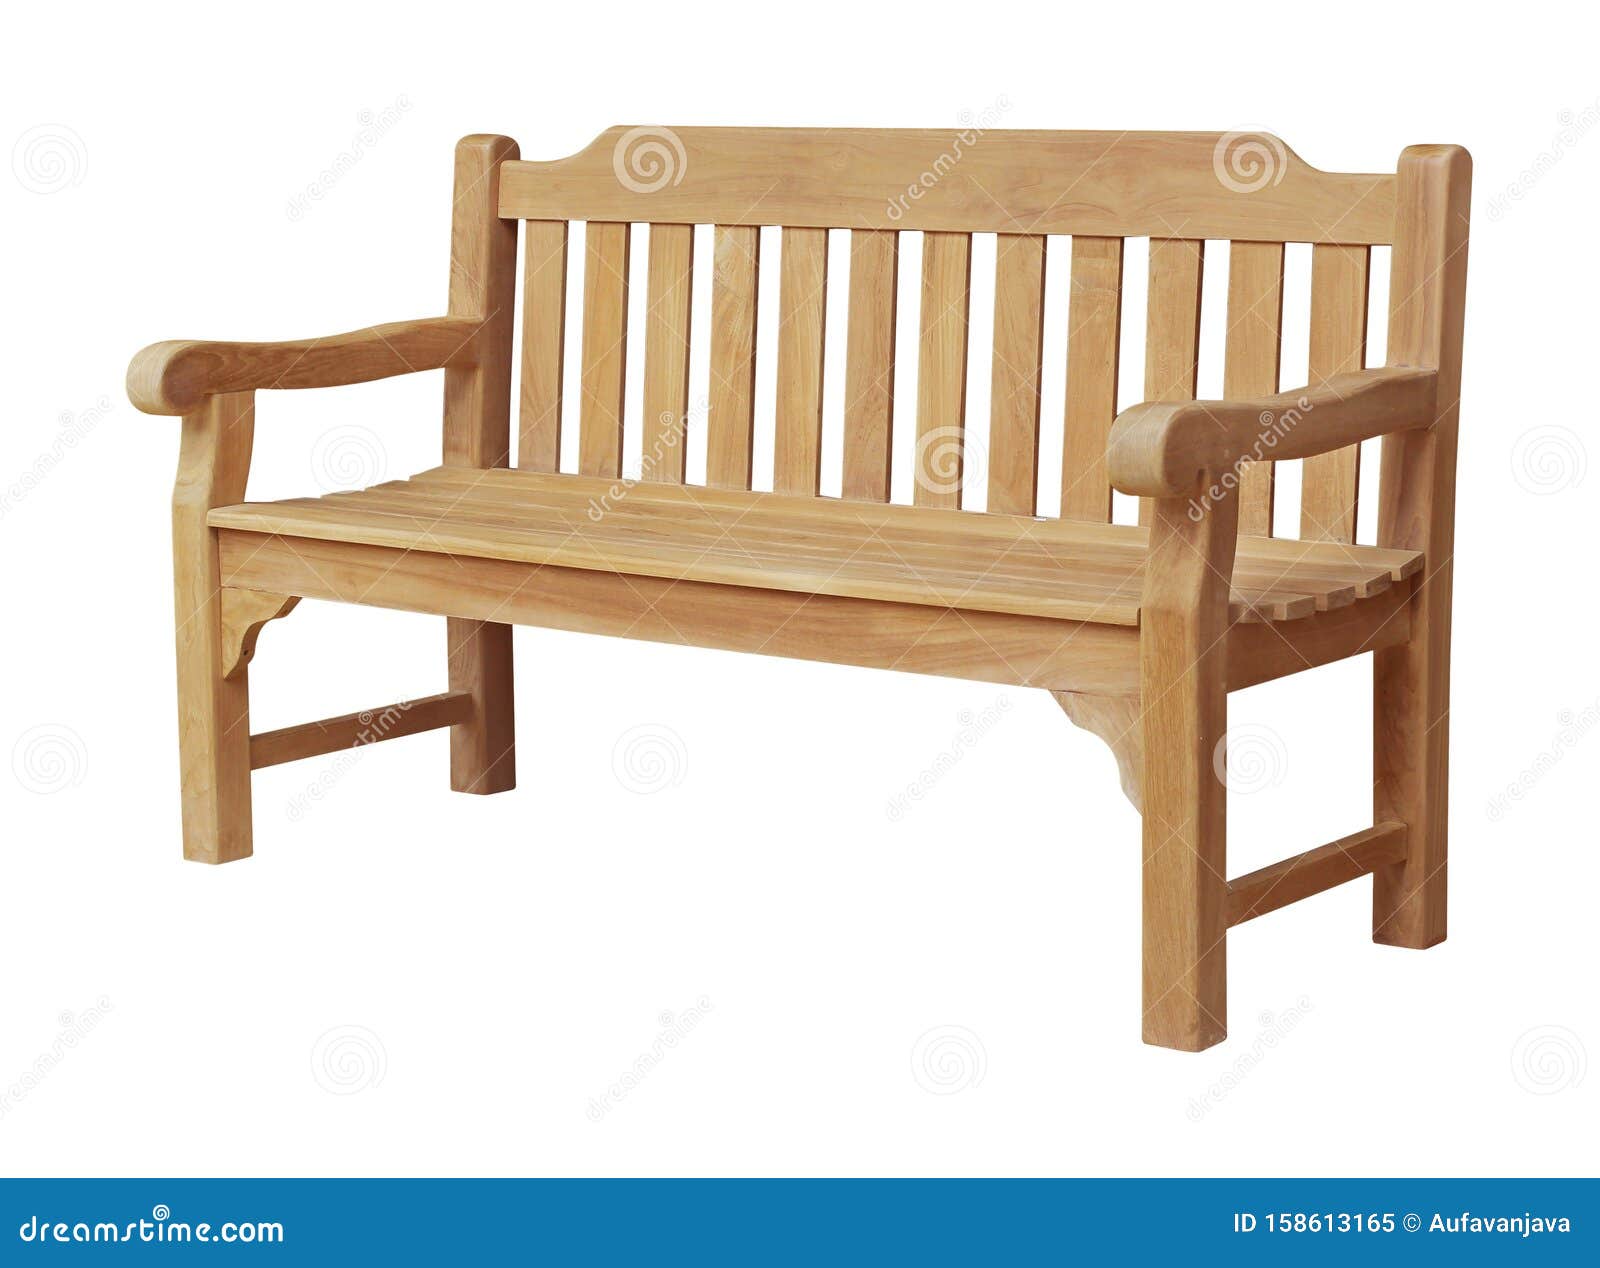 Wooden Bench Furniture for Outdoor or Park Furniture Stock Image ...